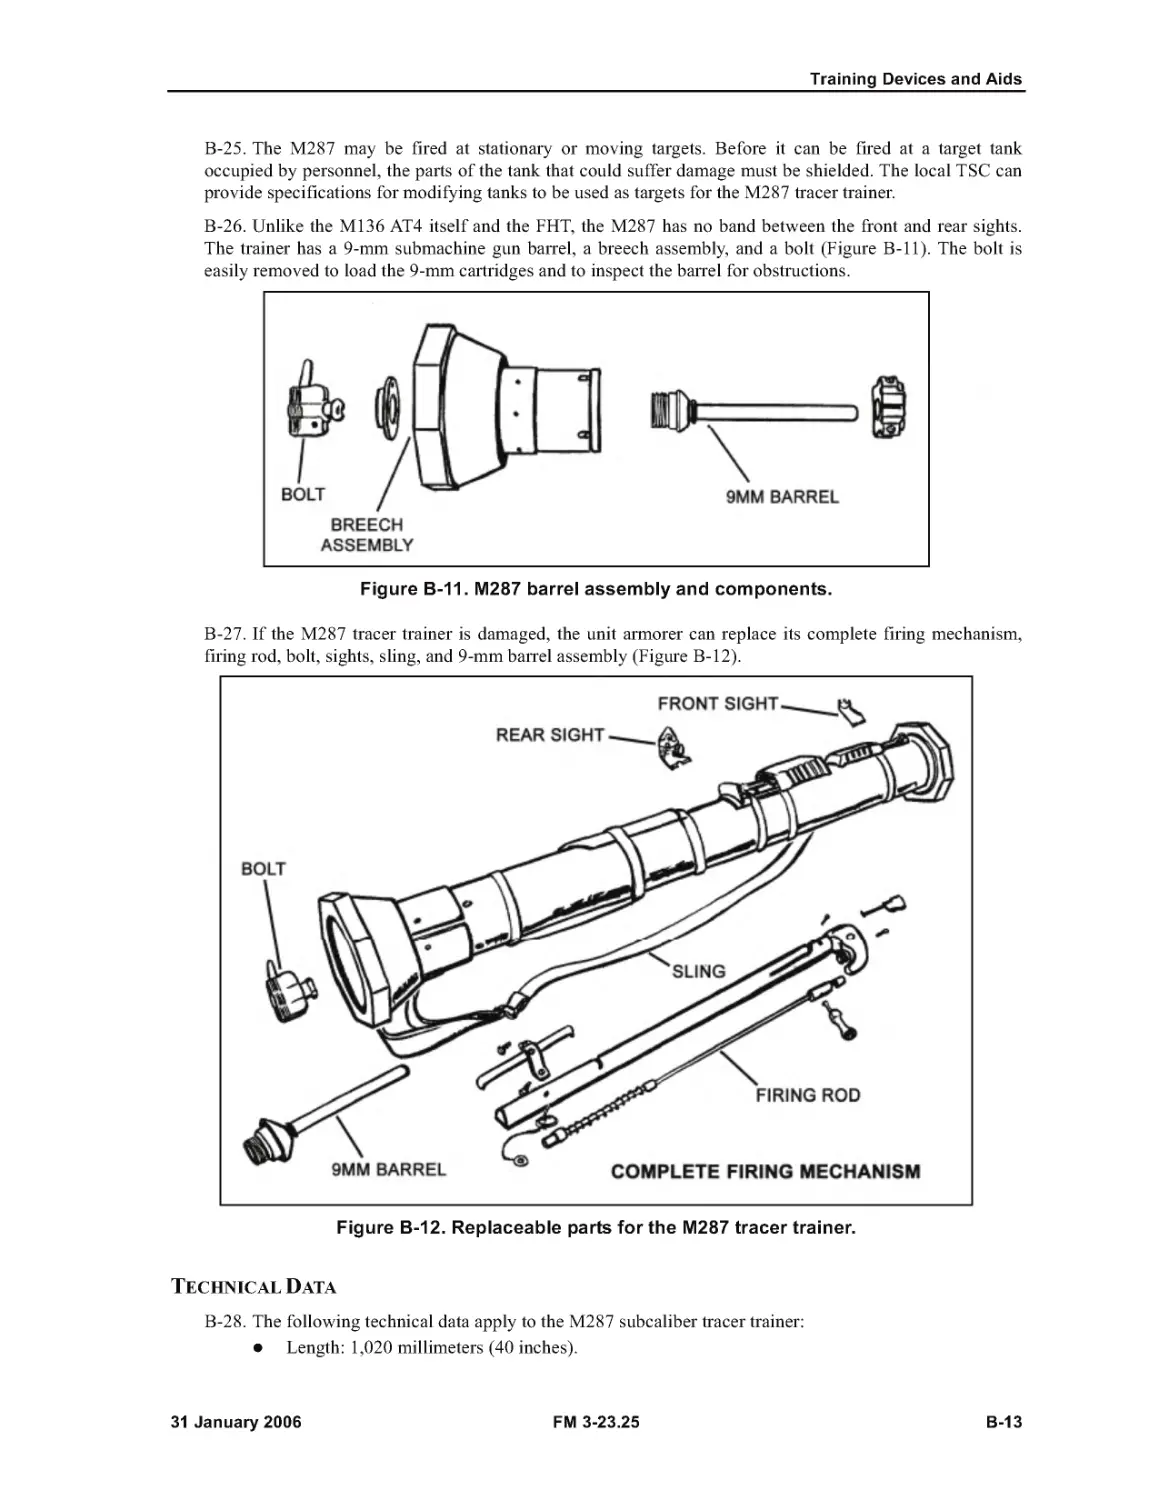 Figure B-11. M287 barrel assembly and components.
Figure B-12. Replaceable parts for the M287 tracer trainer.